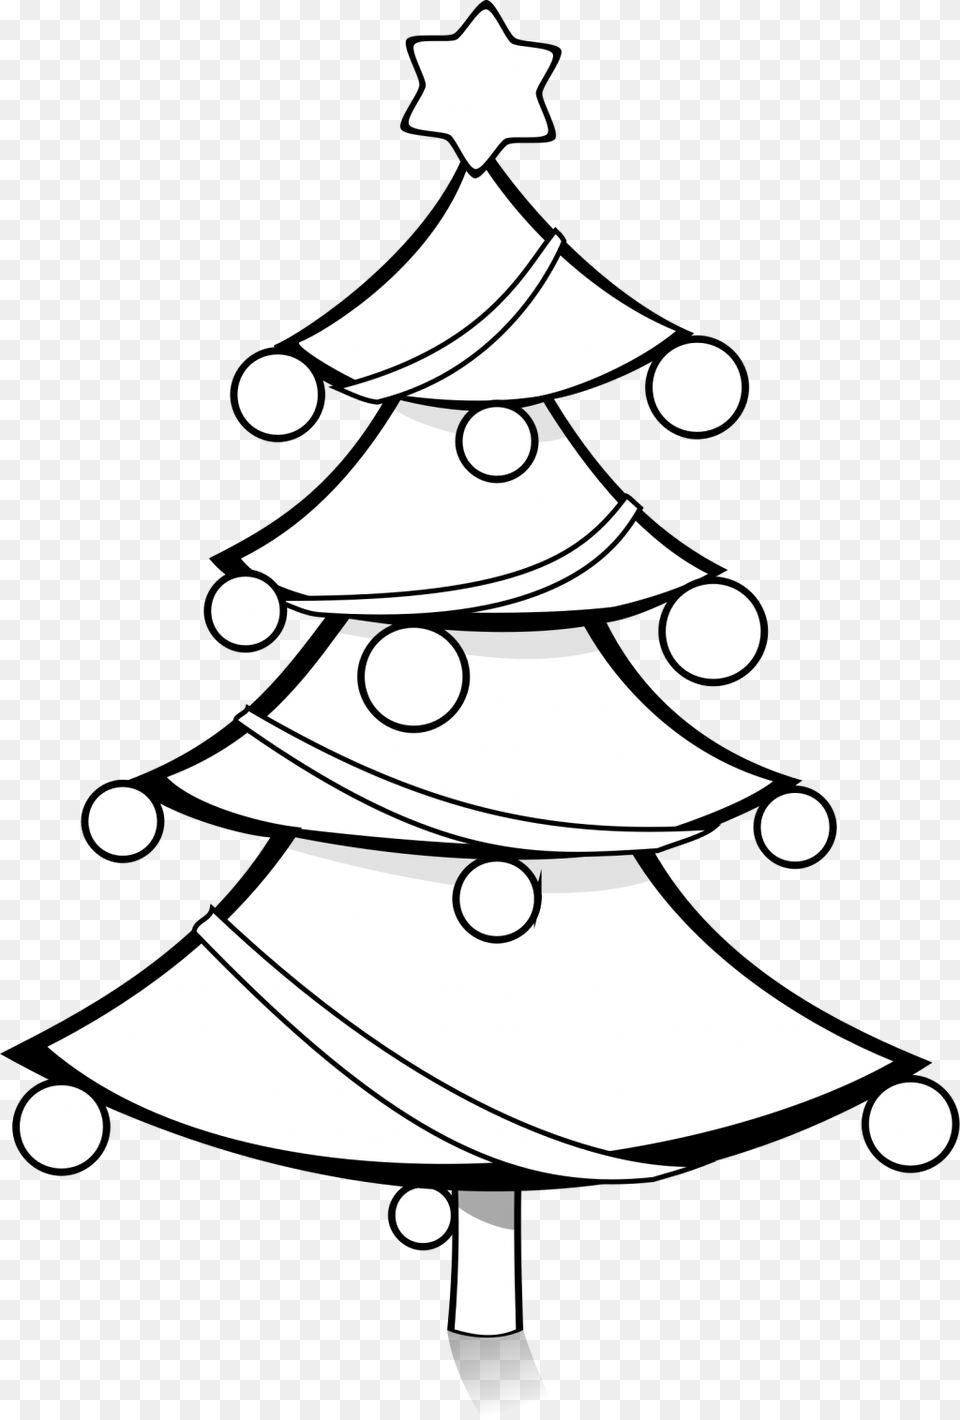 Absorbing Tree Decorations Tree Outline Black Download Clip, Baby, Person, Christmas, Christmas Decorations Free Transparent Png